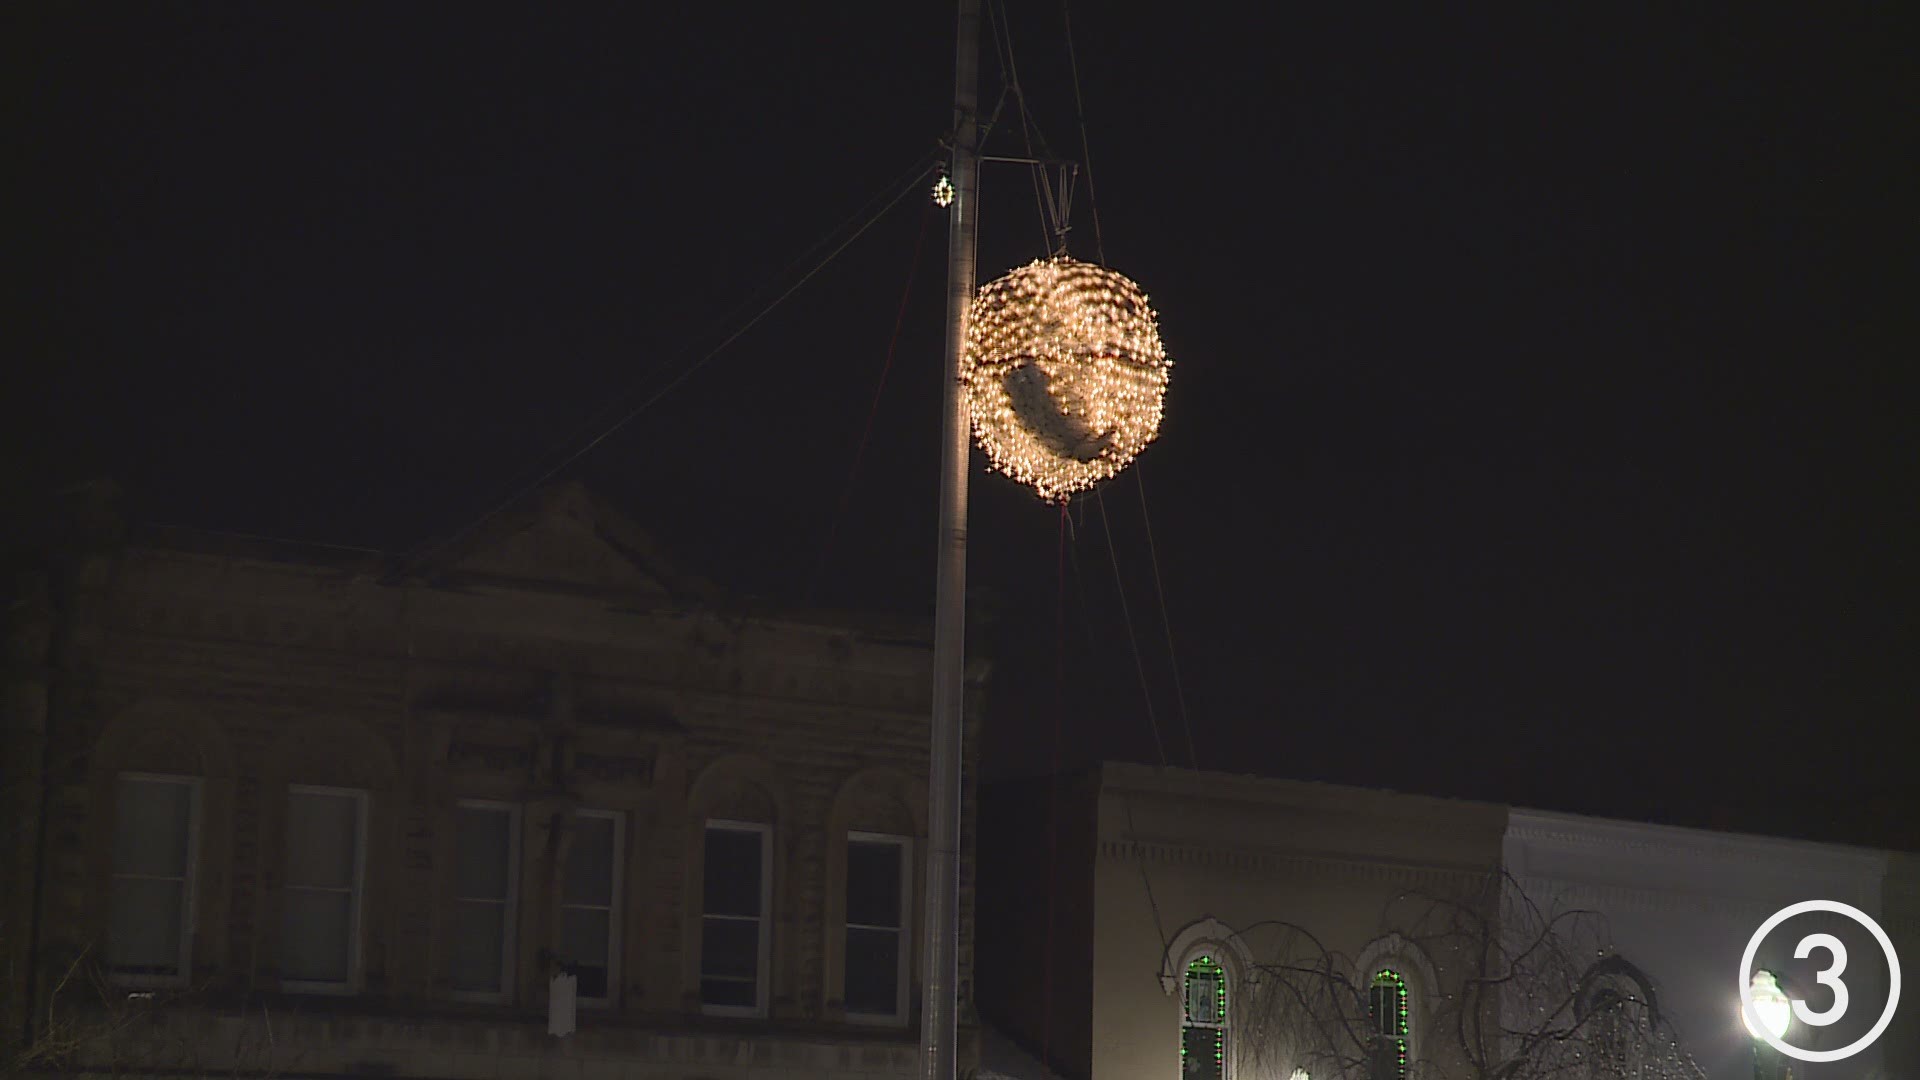 The city of Chagrin Falls kicked off 2020 with its annual Popcorn Ball Drop.